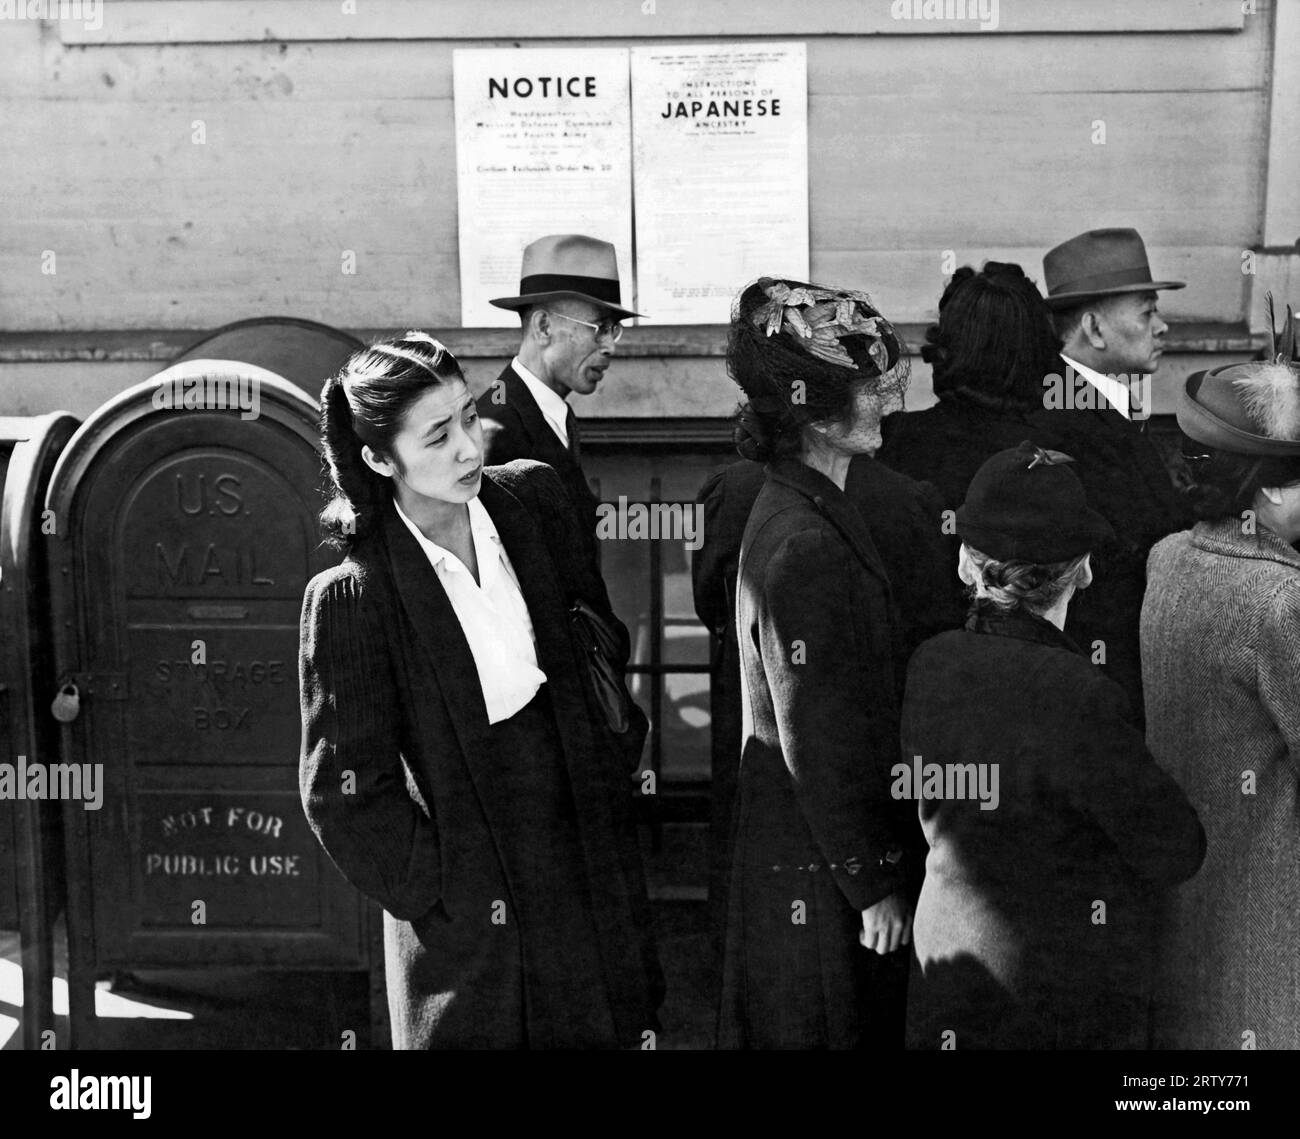 San Francisco, California       April 1942  Japanese-American Shizuko Ina standing behind others waiting to be assigned a 'family number' before being removed from their homes and incarcerated in a detention facility at Tanforan Racetrack. She was later moved with her husband, Itaru Ina to a concentration camp in Topaz, Utah, and then to Tule Lake Segregation Center, near Newell in Northern California. The family was separated in July 1945 when Itaru was transferred to Fort Lincoln, a Department of Justice camp for 'enemy aliens' in Bismarck, North Dakota, and reunited in April 1946 at Crystal Stock Photo